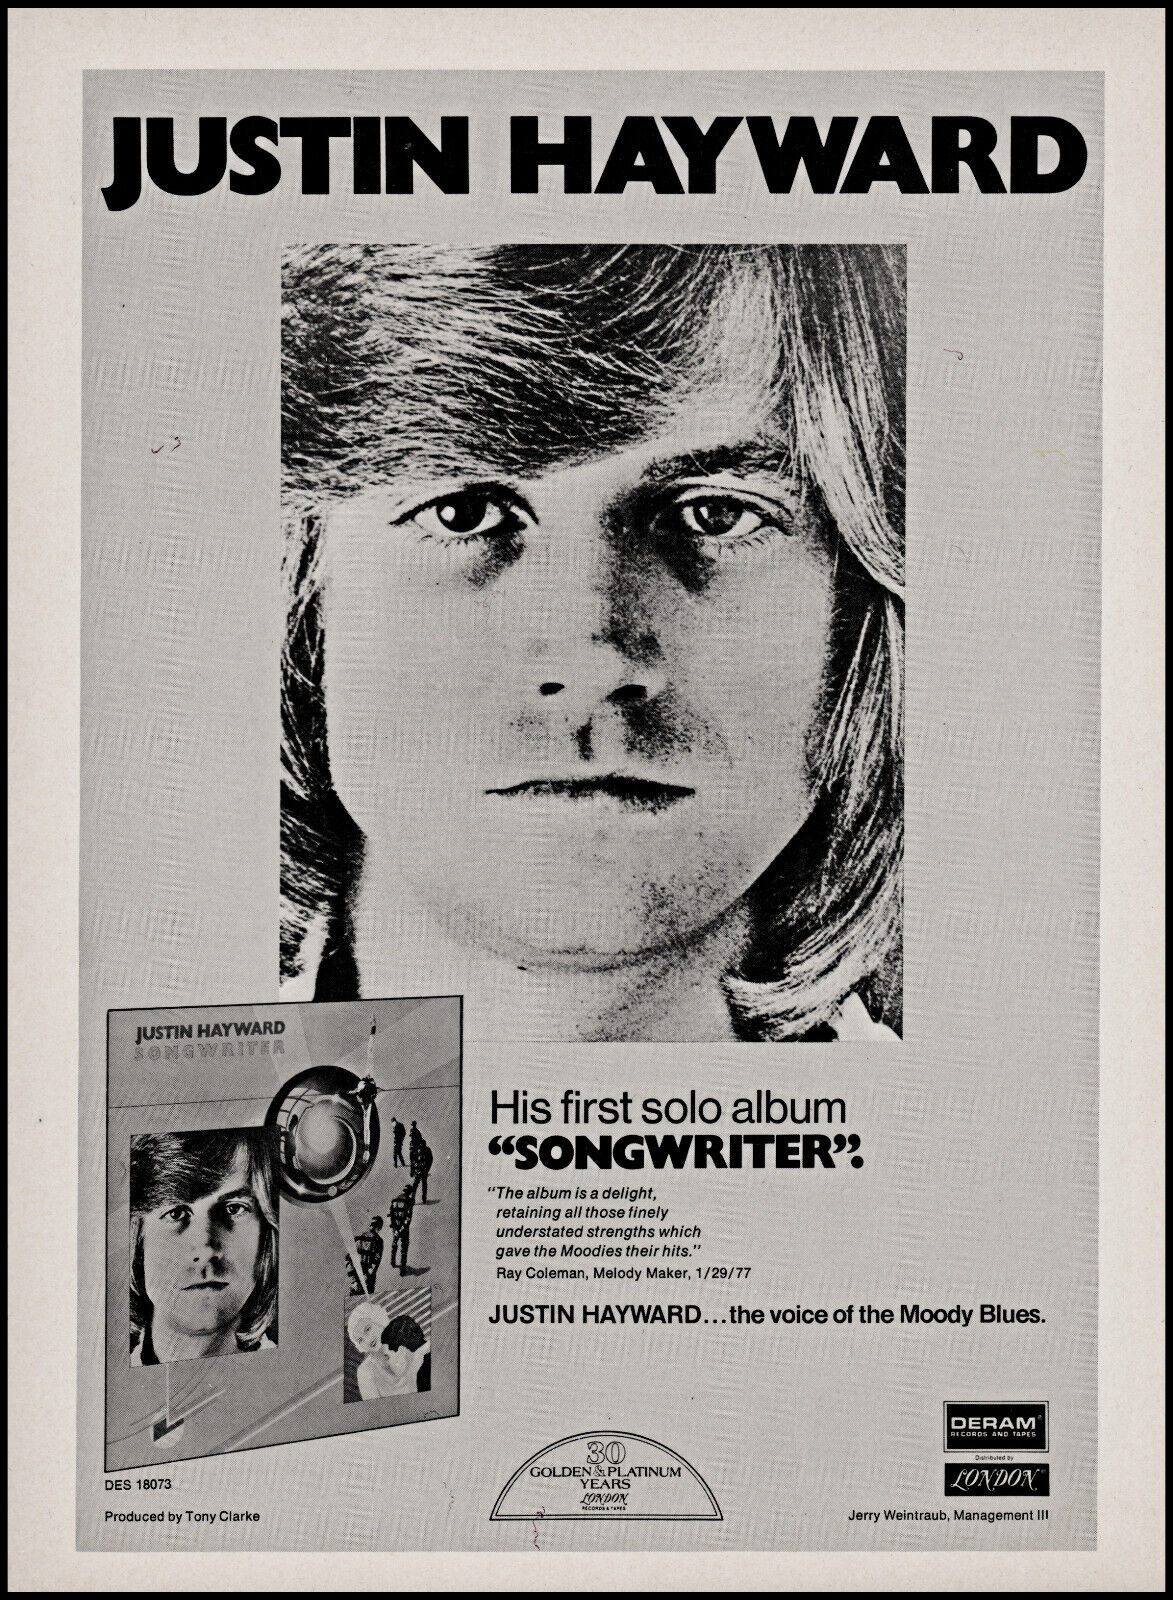 1977 Justin Hayward (Moody Blues) Songwriter Album release photo print ad ads4